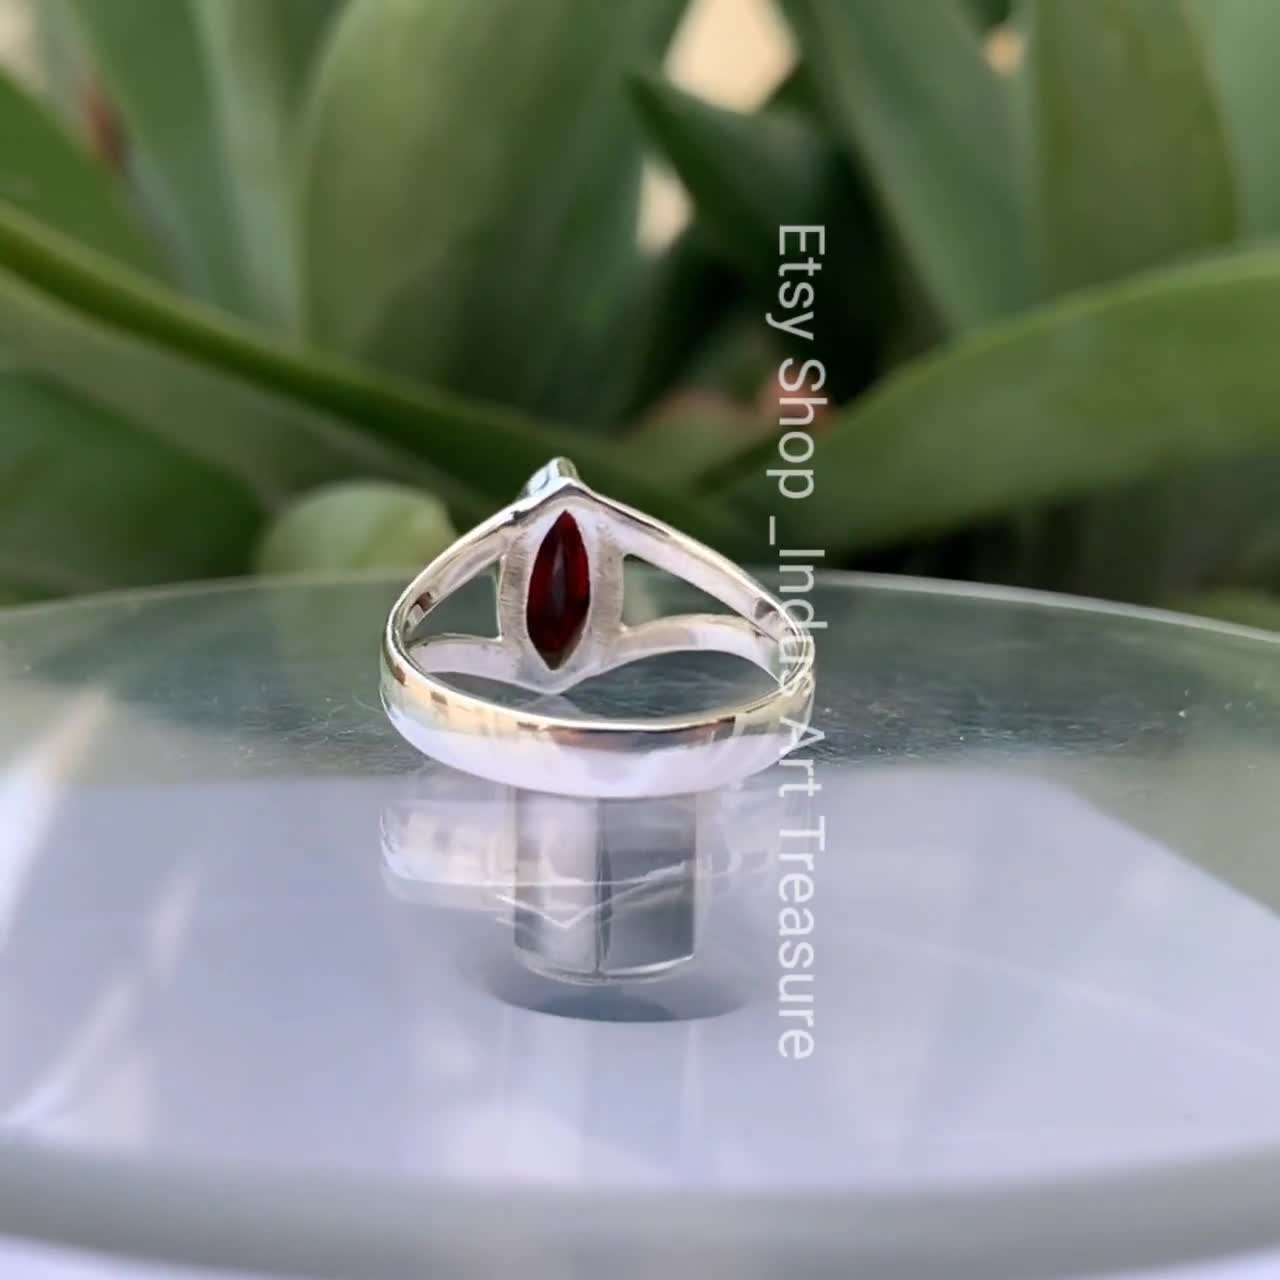 Buy Natural Garnet Etsy Collection Silver Ring Etsy Pick Silver Garnet Ring  Floral Design Ring Silver Ring Garnet Ring Rings Collection Online in India  - Etsy